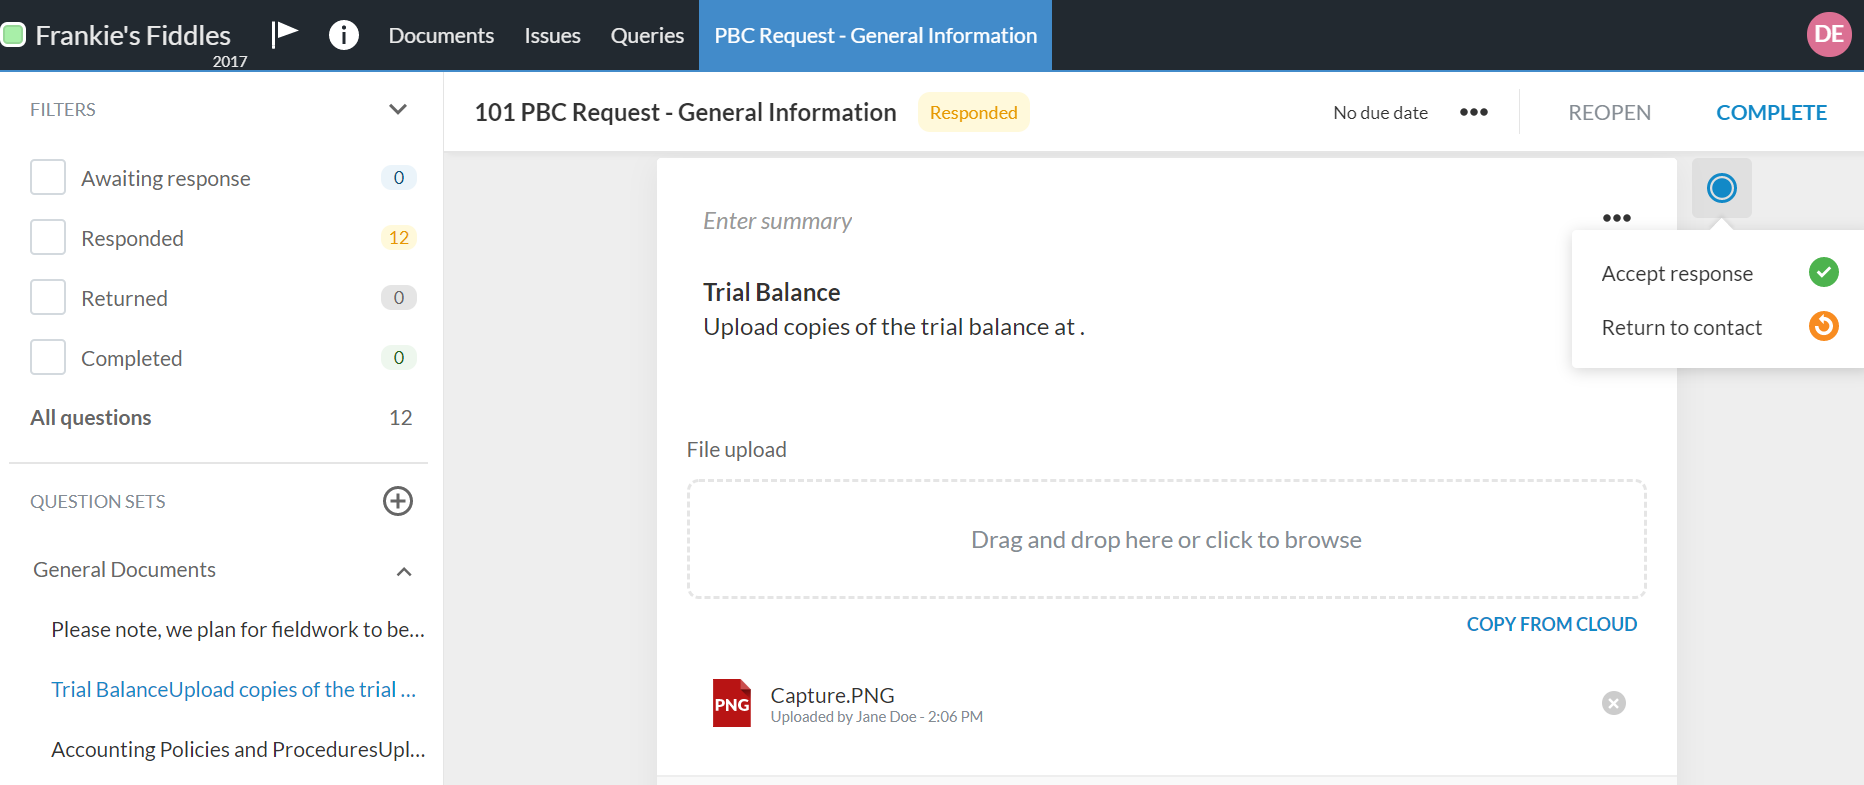 You can filter all responded questions and either accept or return the client response.